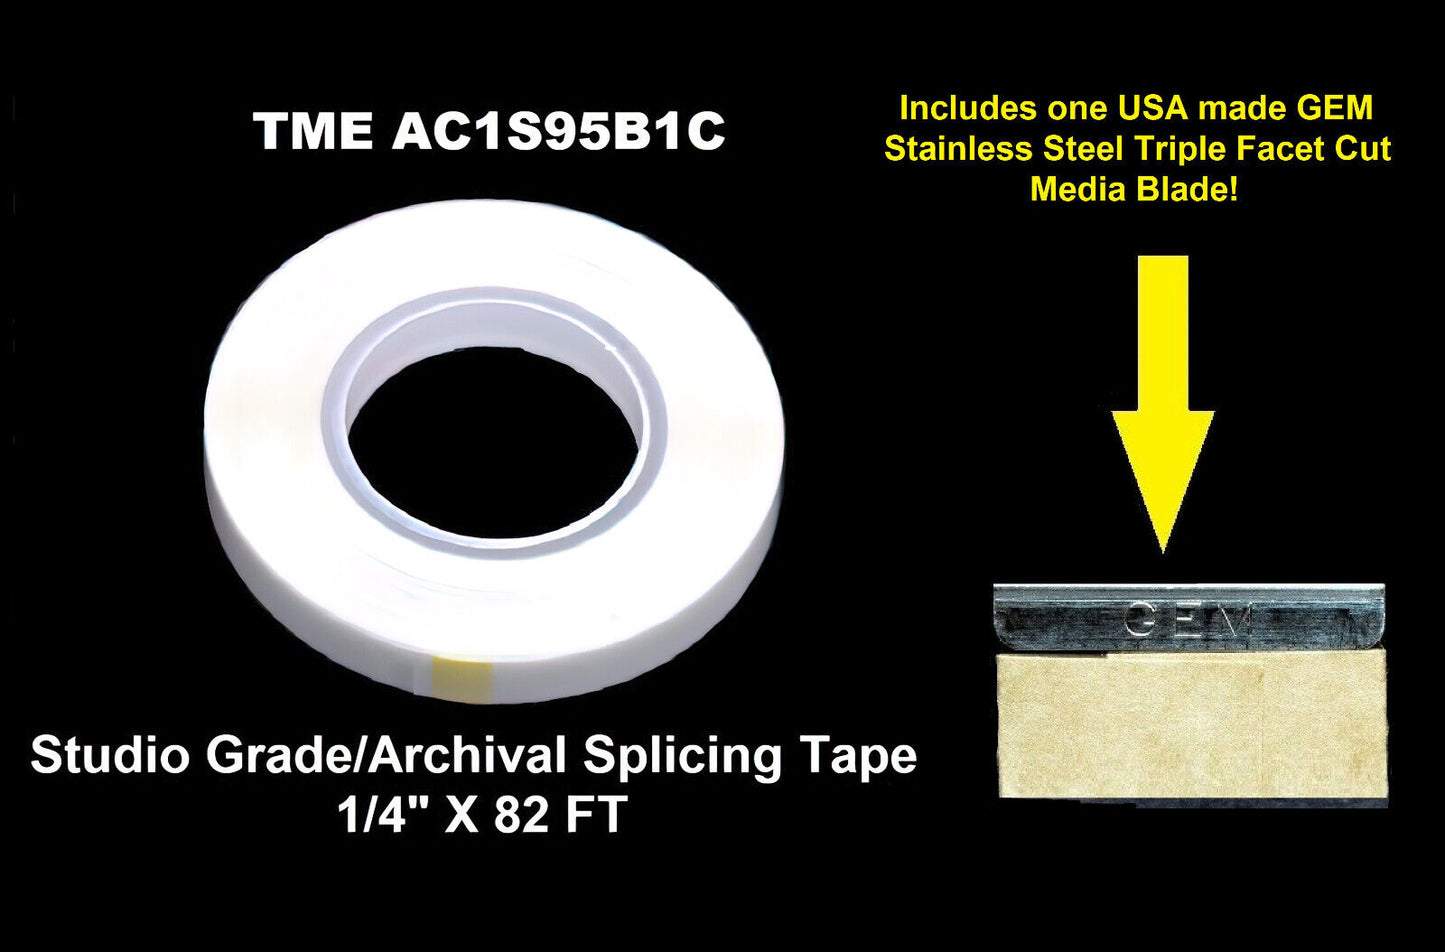 Splicing Tape Open Reel Audio 1/4" Vintage White Color 82FT With GEM Media Blade NEW